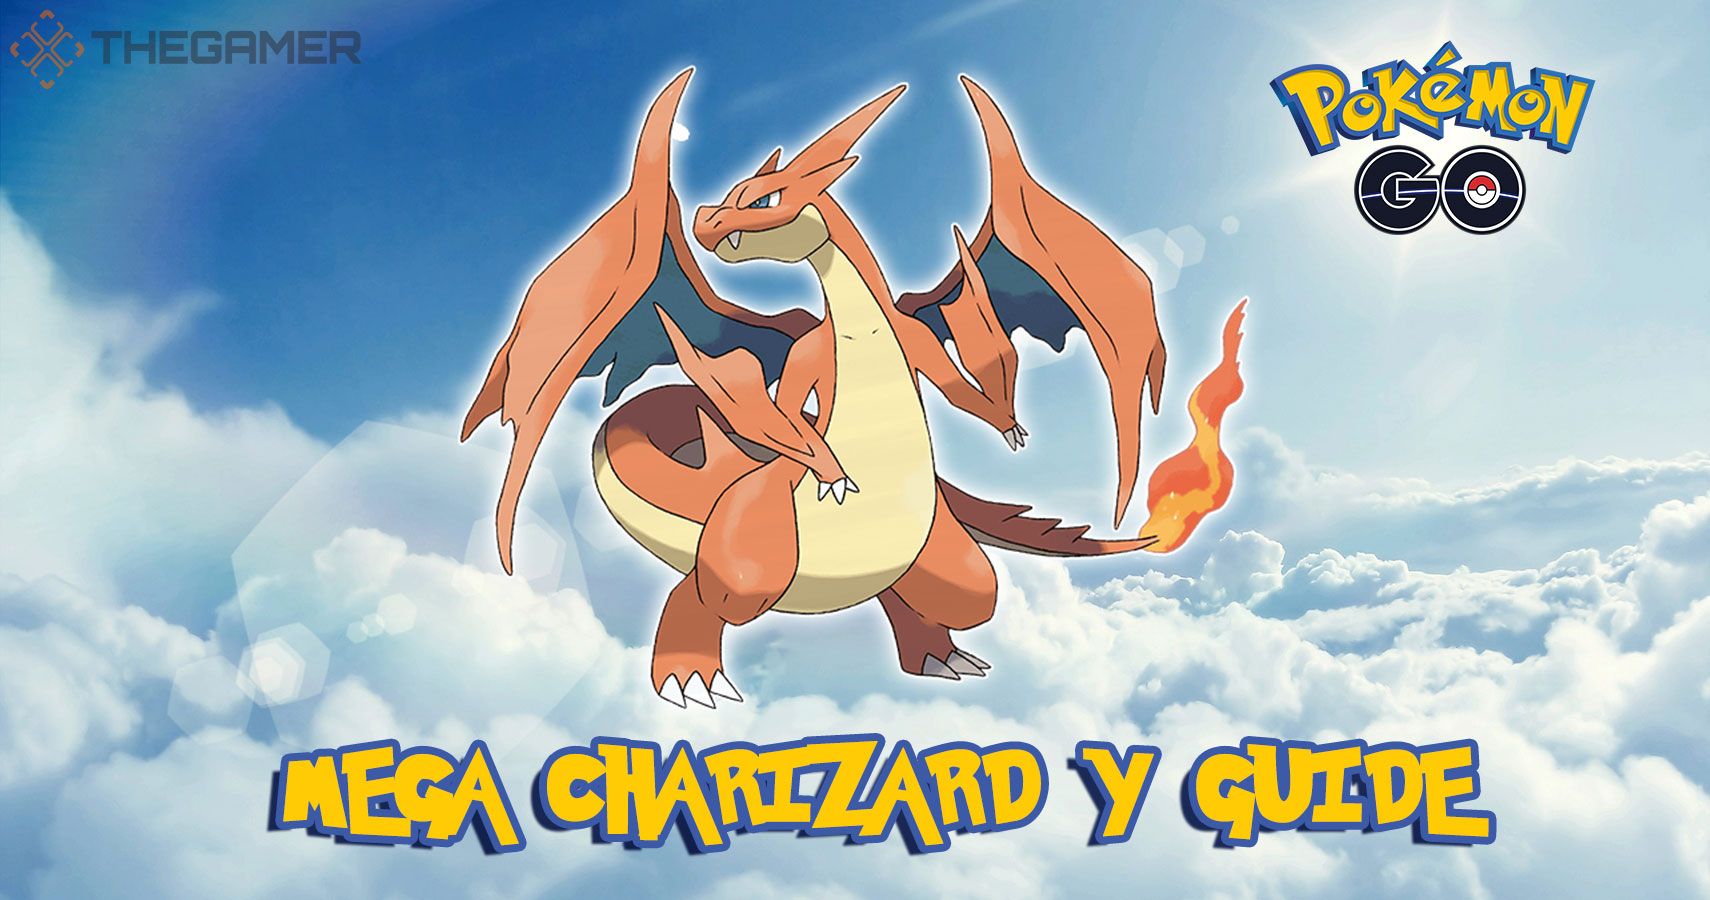 Which Is Truly Better? Mega Charizard X or Y?